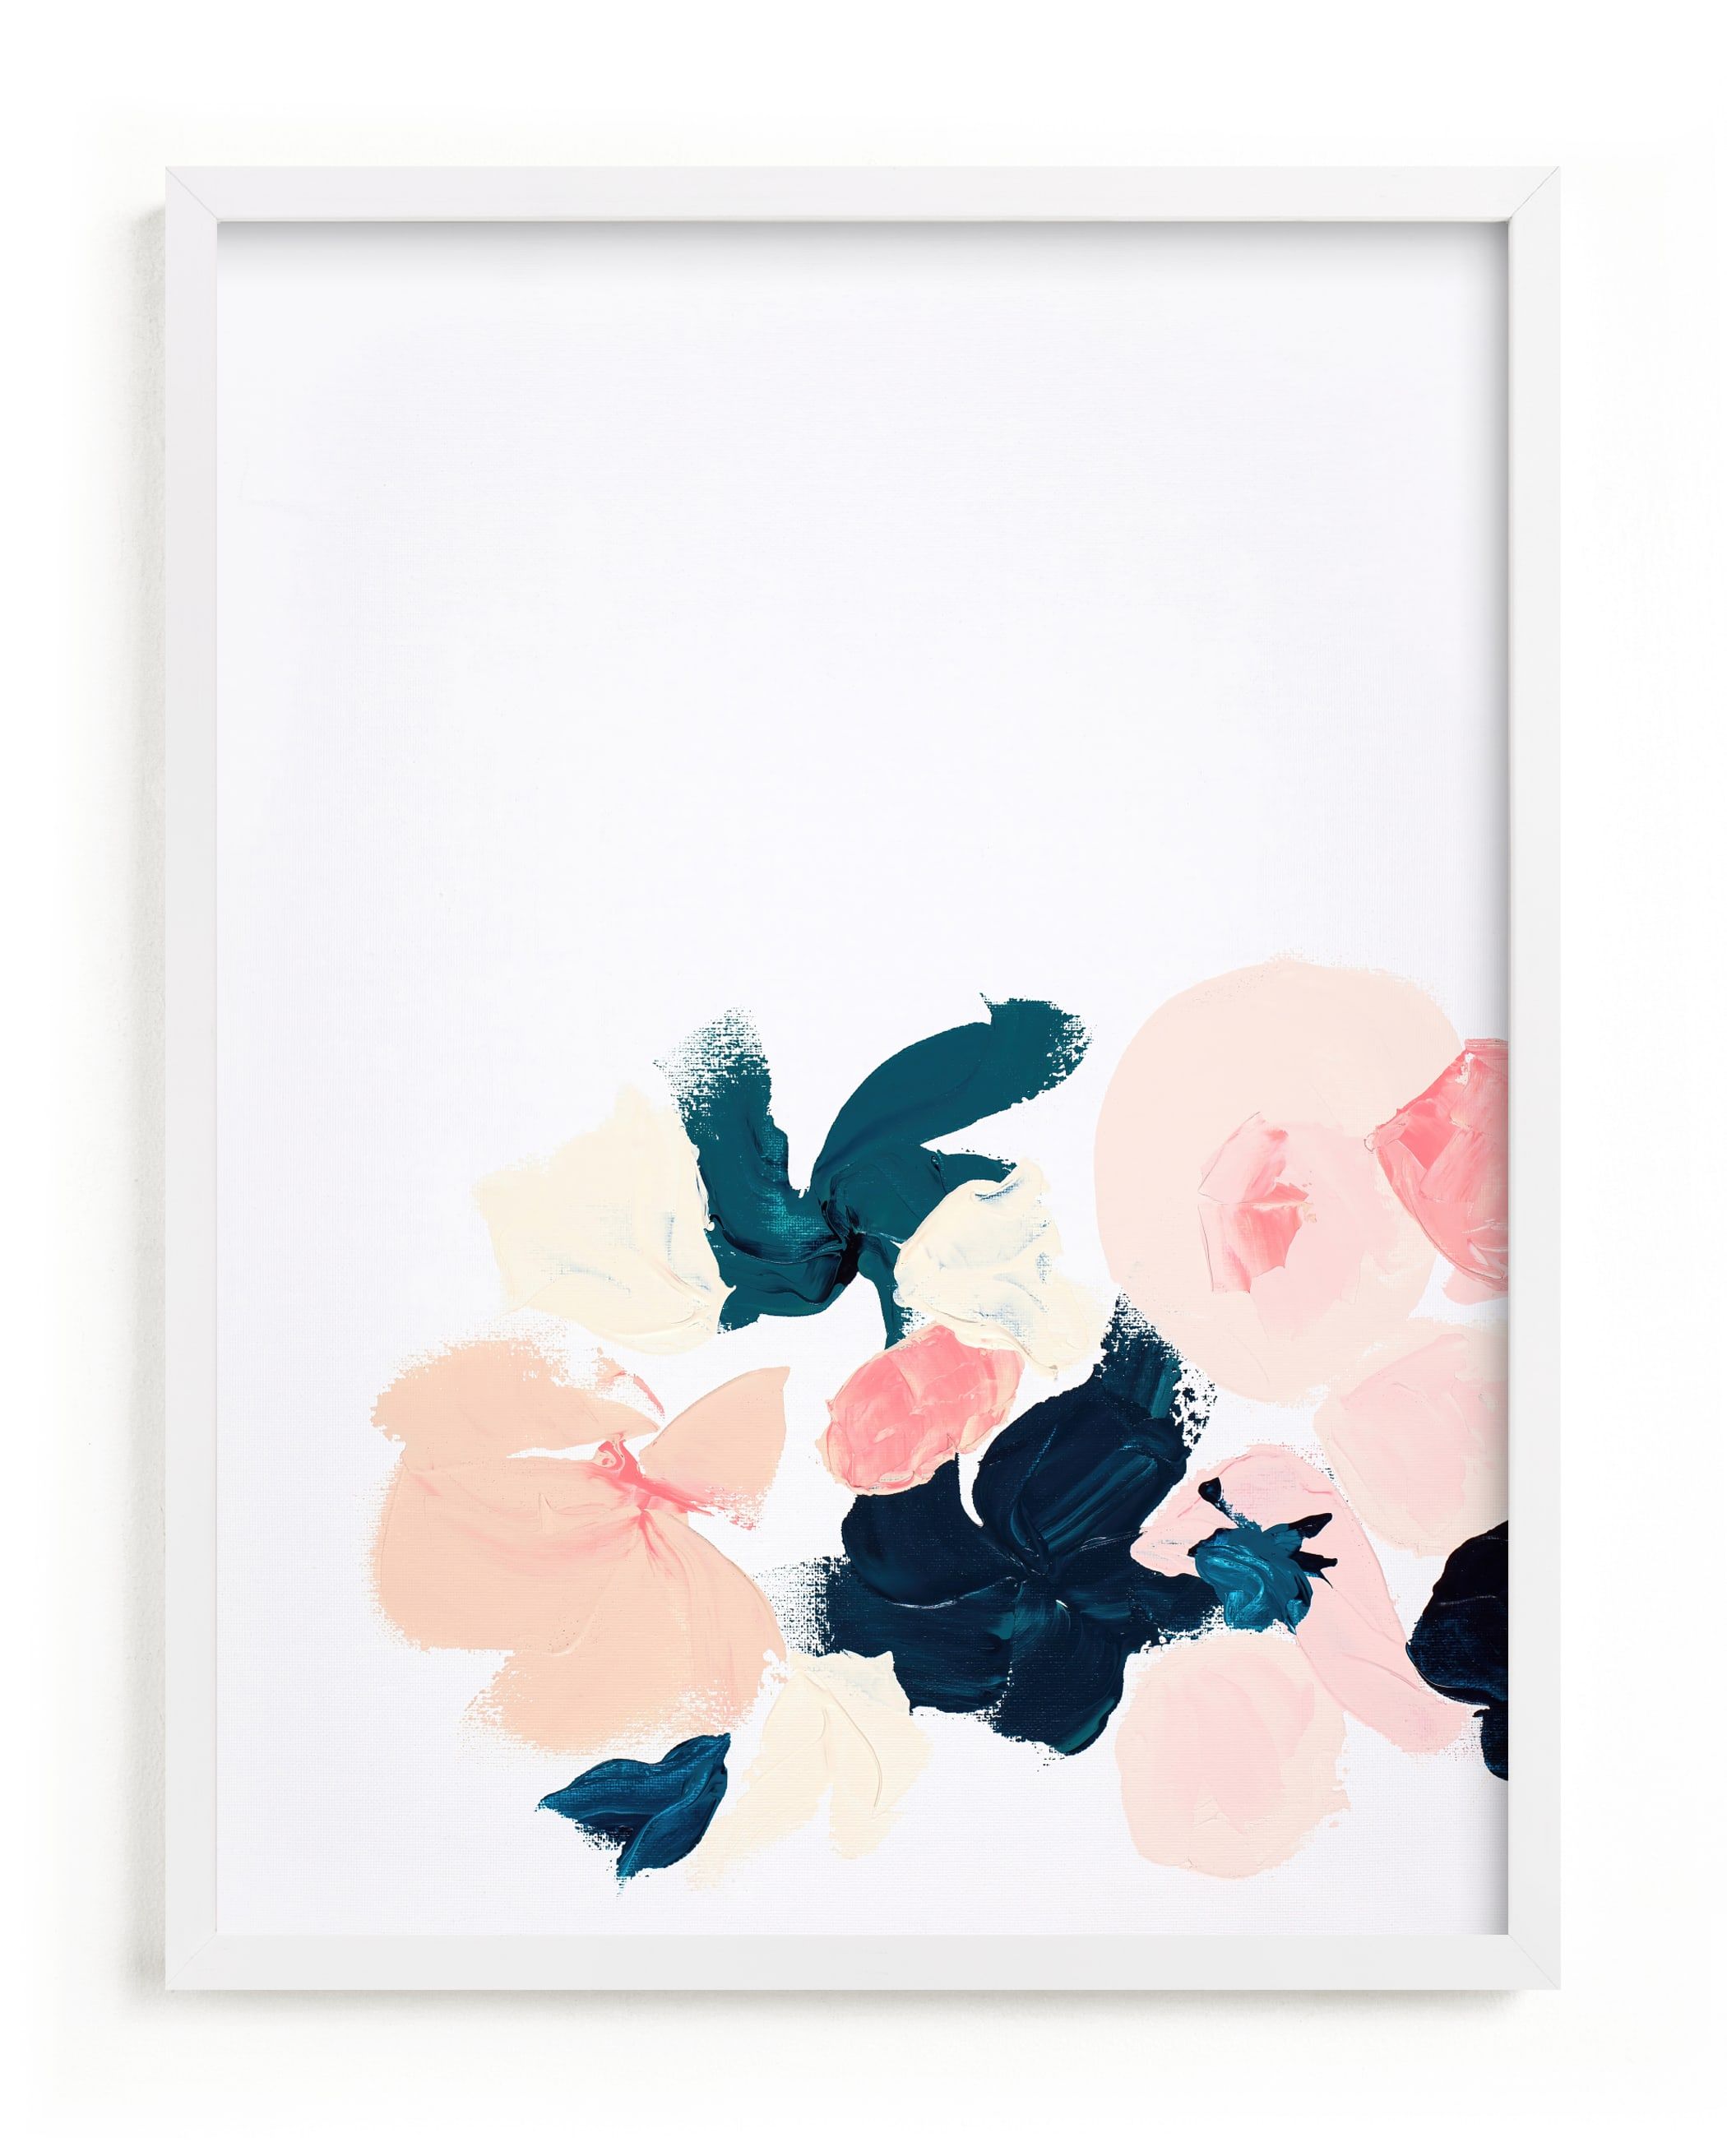 "January Botanical Abstract Print" - Painting Limited Edition Art Print by Caryn Owen. | Minted